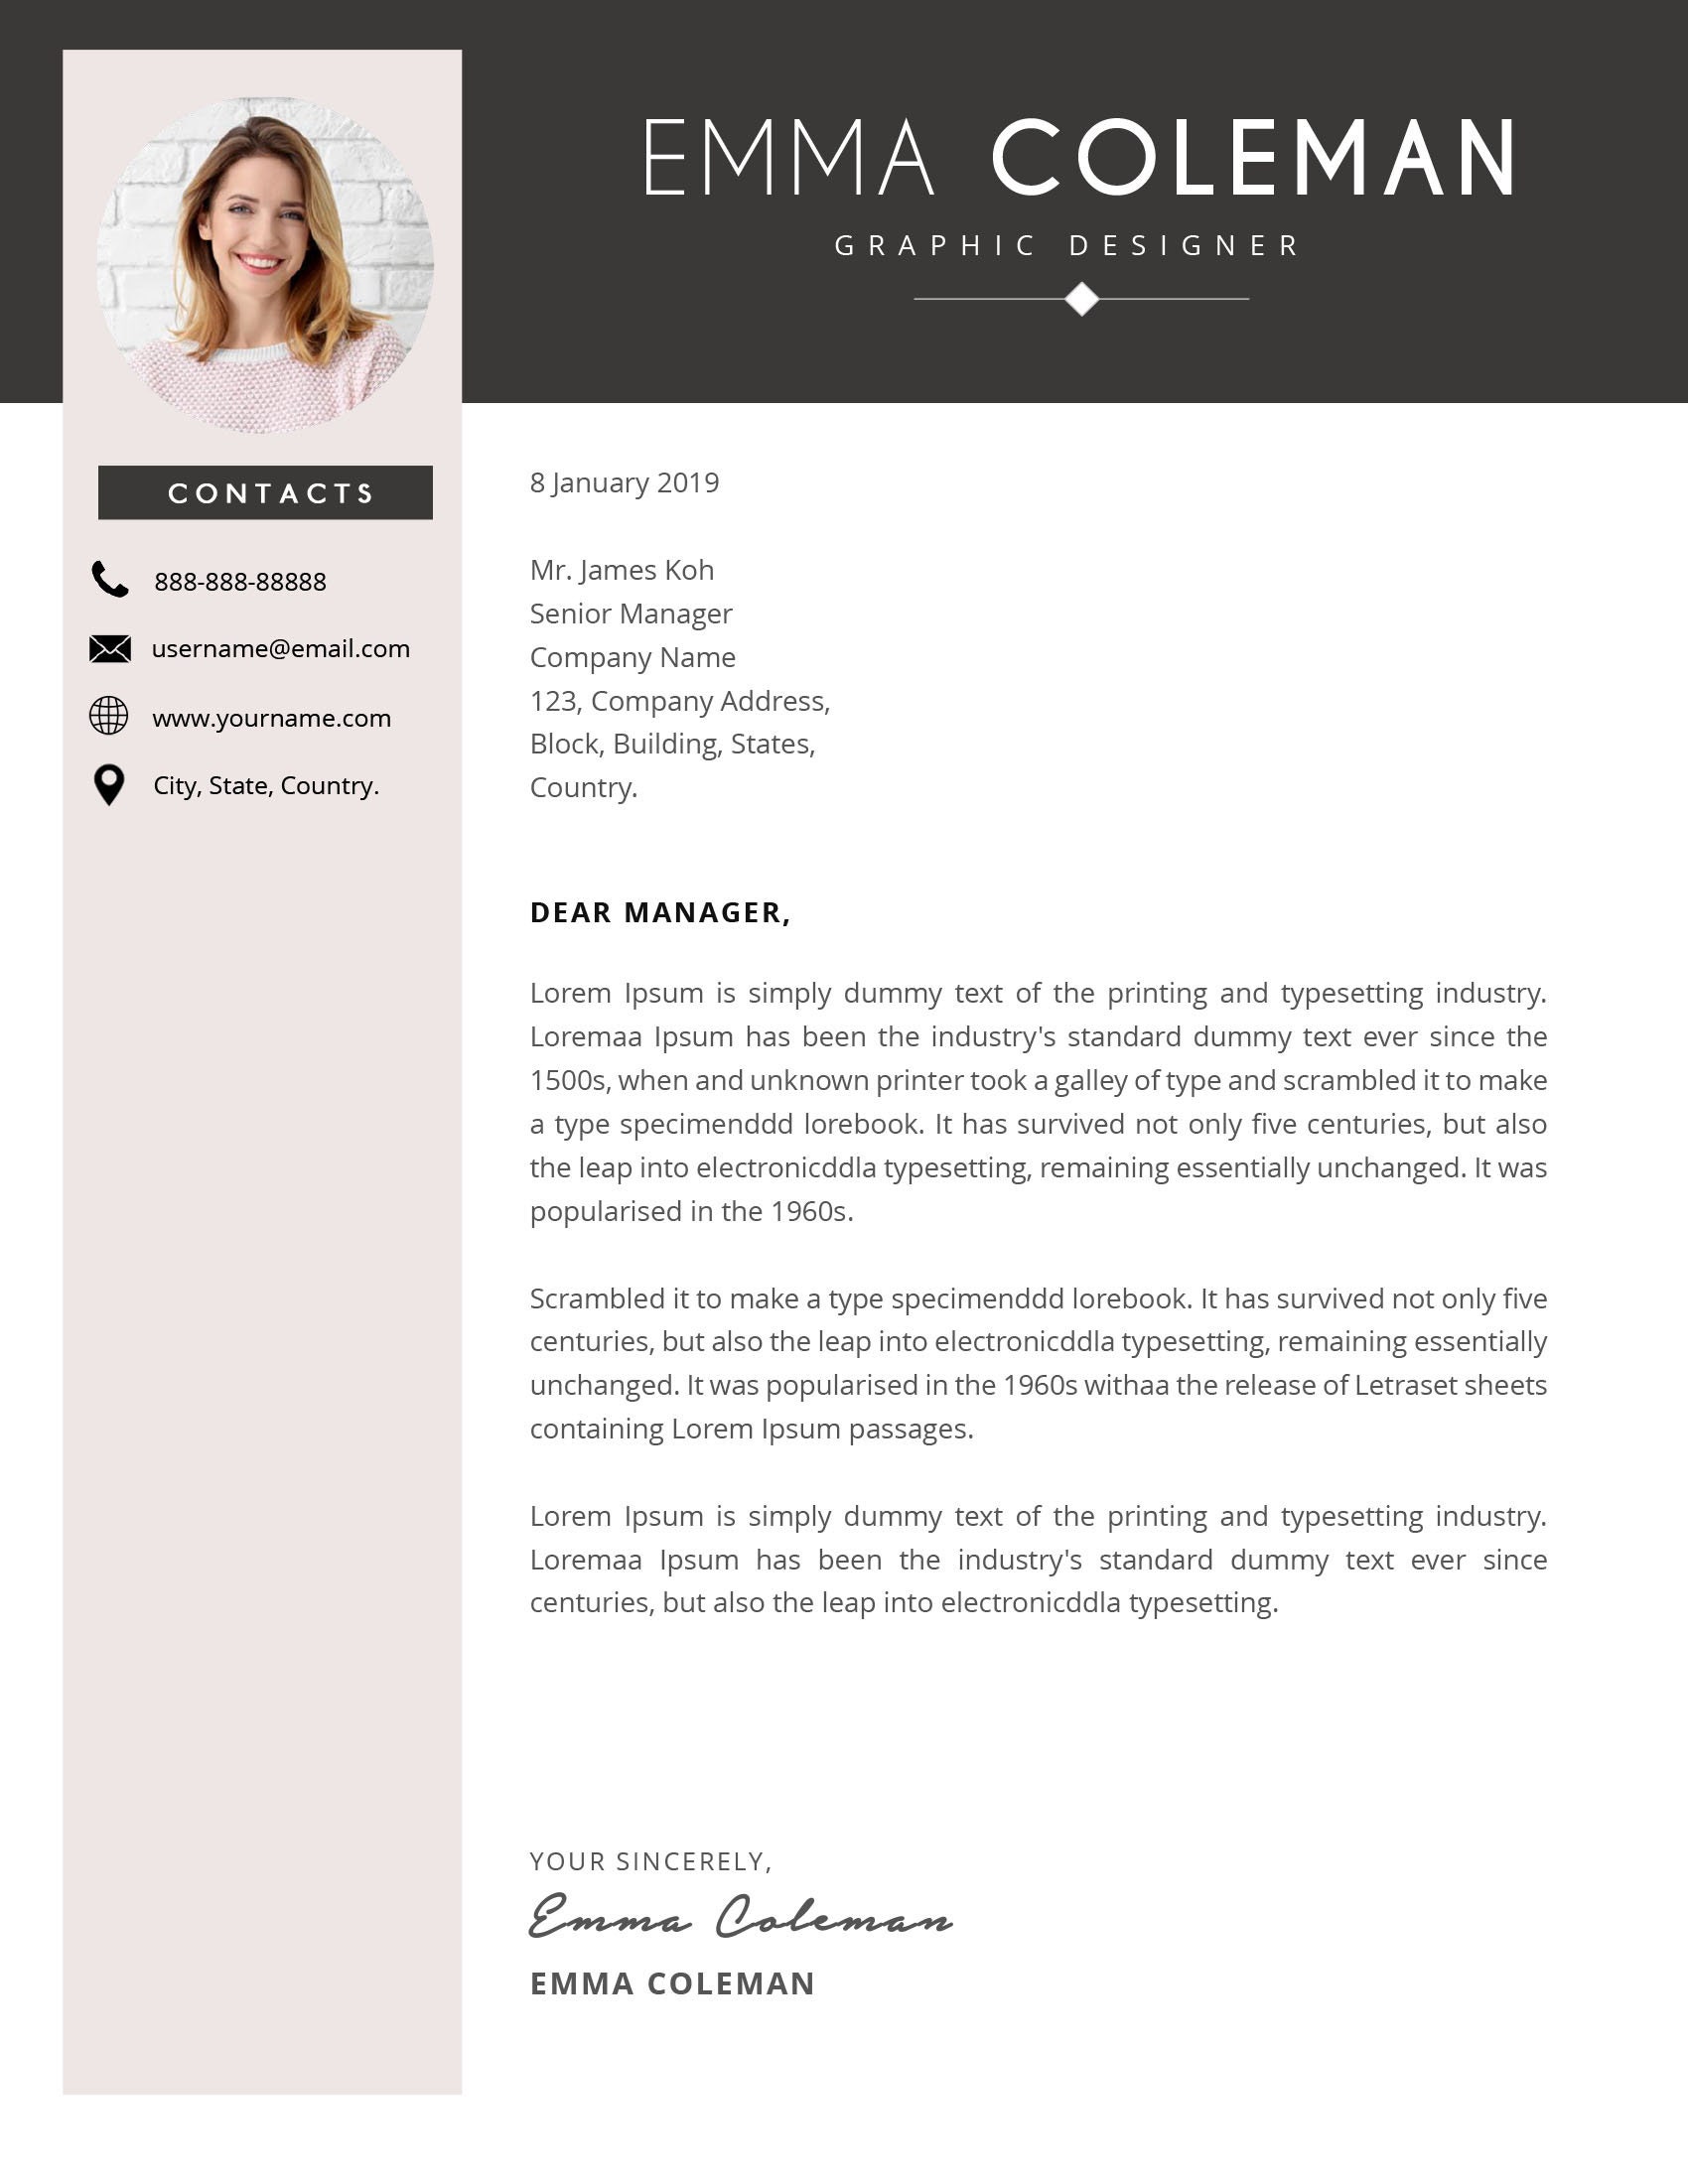 Emma Coleman Resume Template / CV Template Cover Letter | Etsy